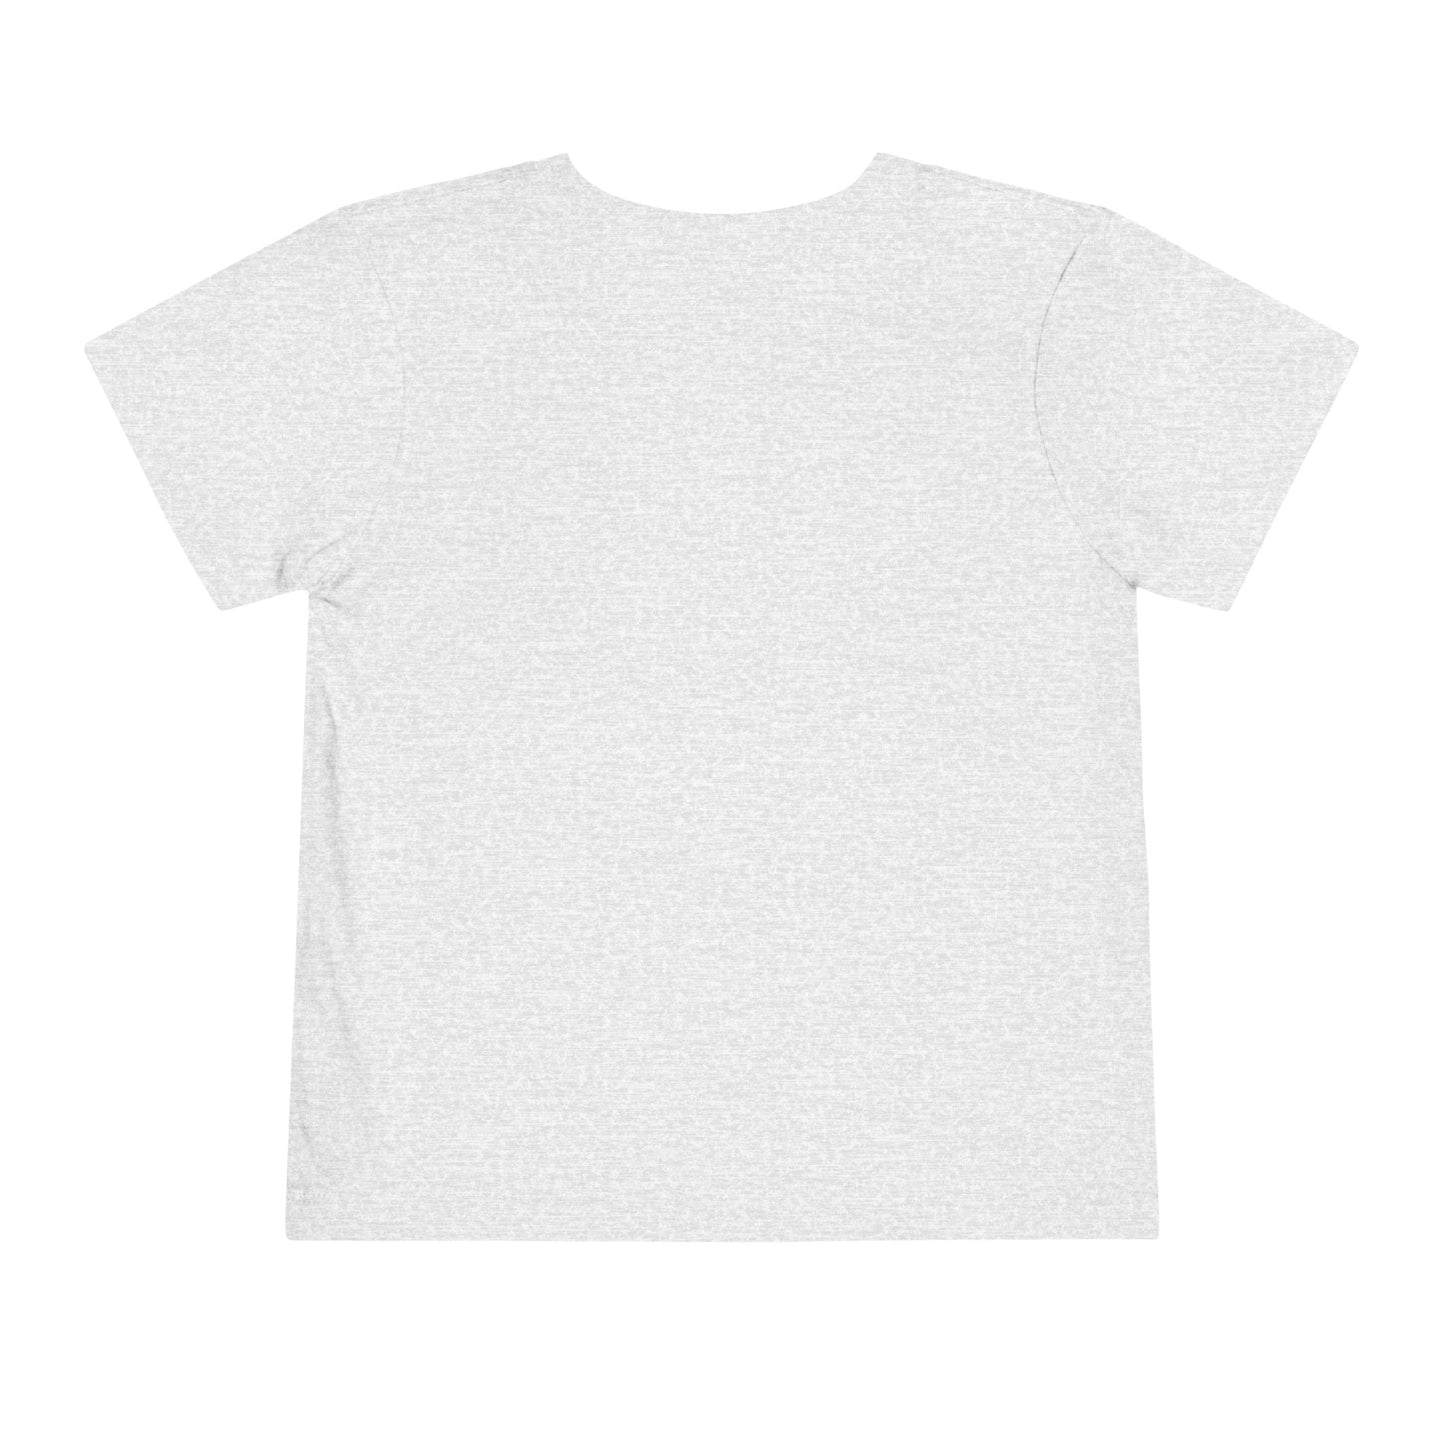 DUDE Toddler Heather Tee - Soft Airlume Cotton, Comfortable & Stylish